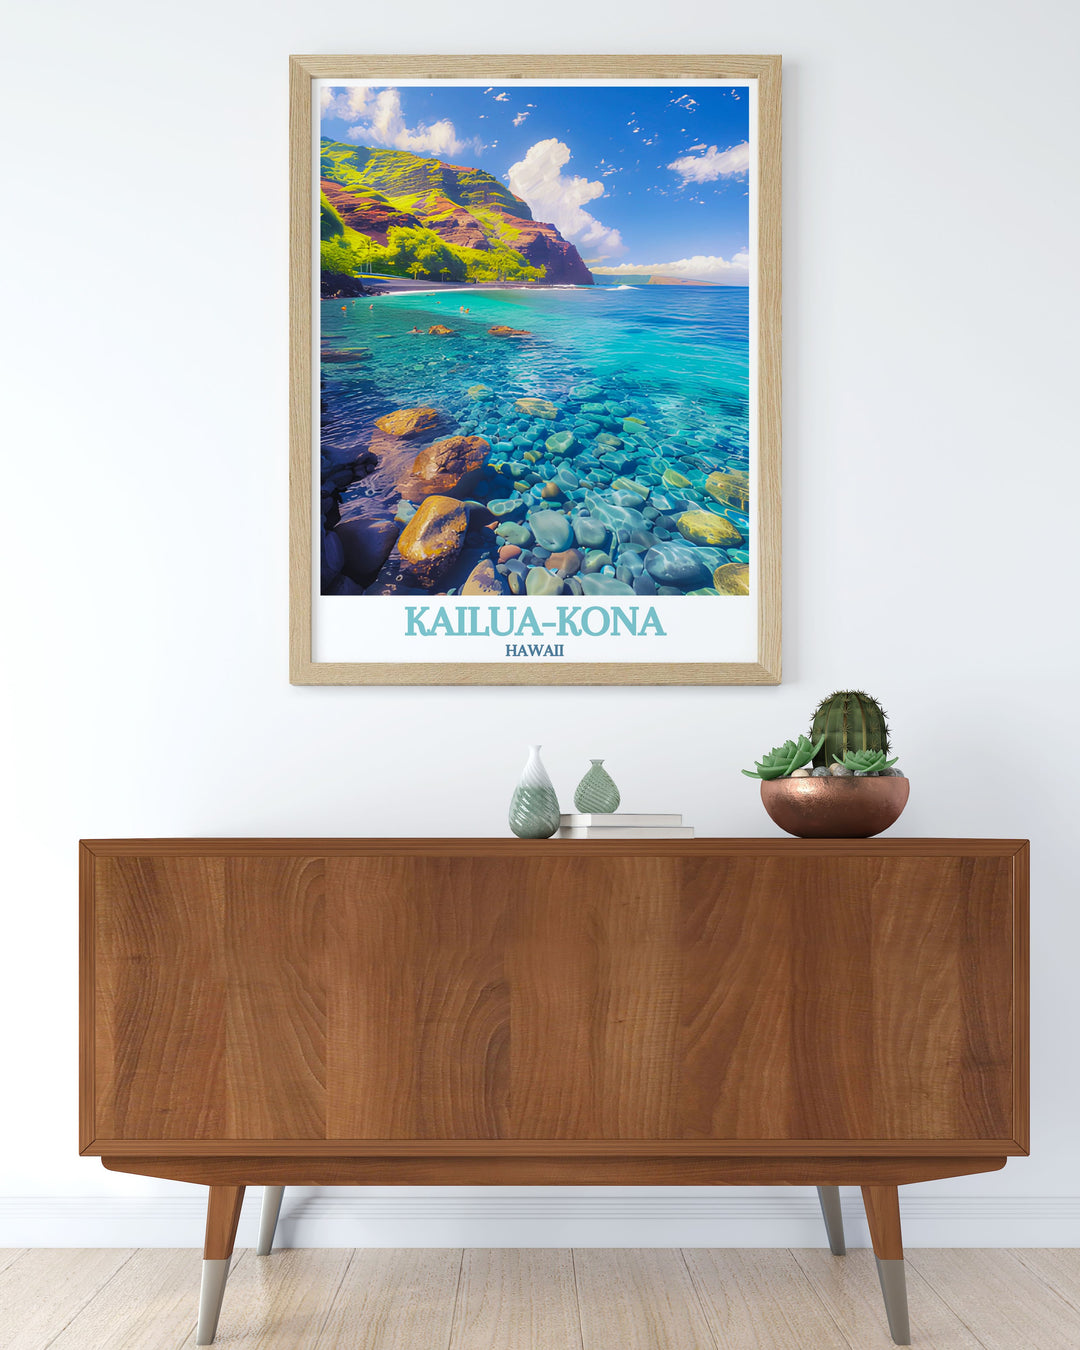 Poster of Kailua Kona, highlighting its vibrant beaches and cultural heritage. The detailed illustration celebrates the historical significance and scenic beauty of this Hawaiian destination.